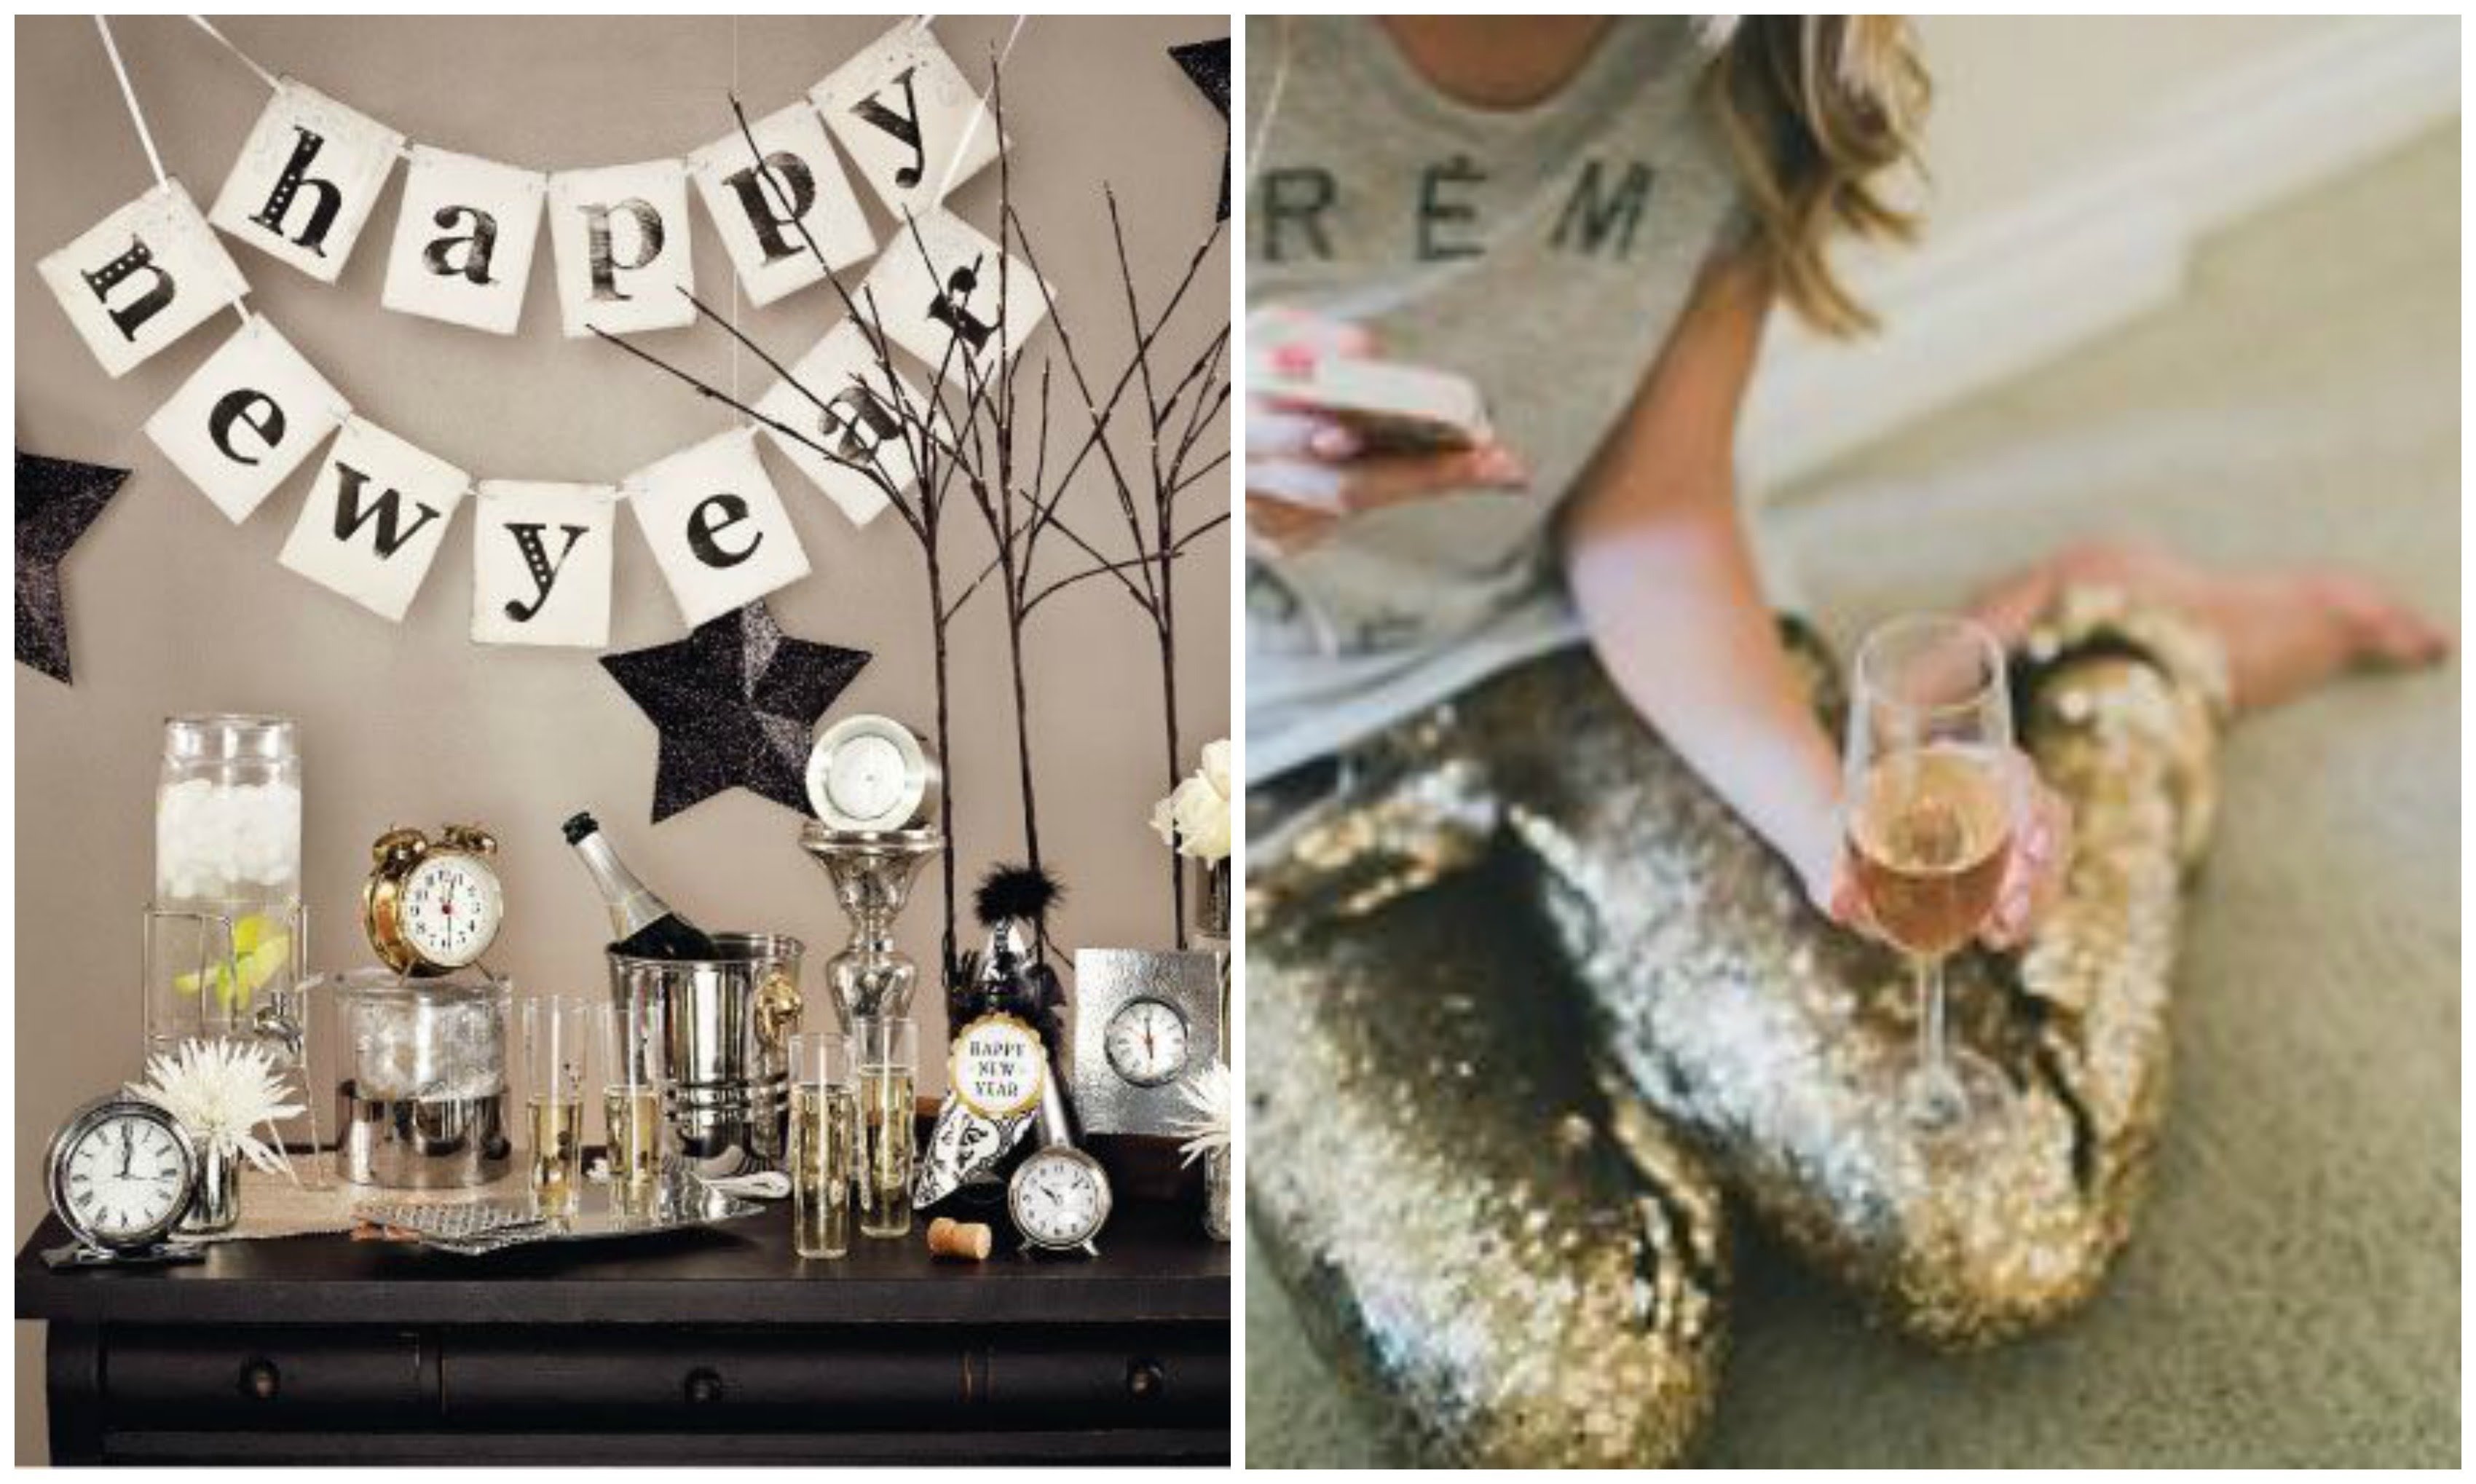 10 Stunning Ideas For New Years Eve new years eve party ideas youtube 6 2022